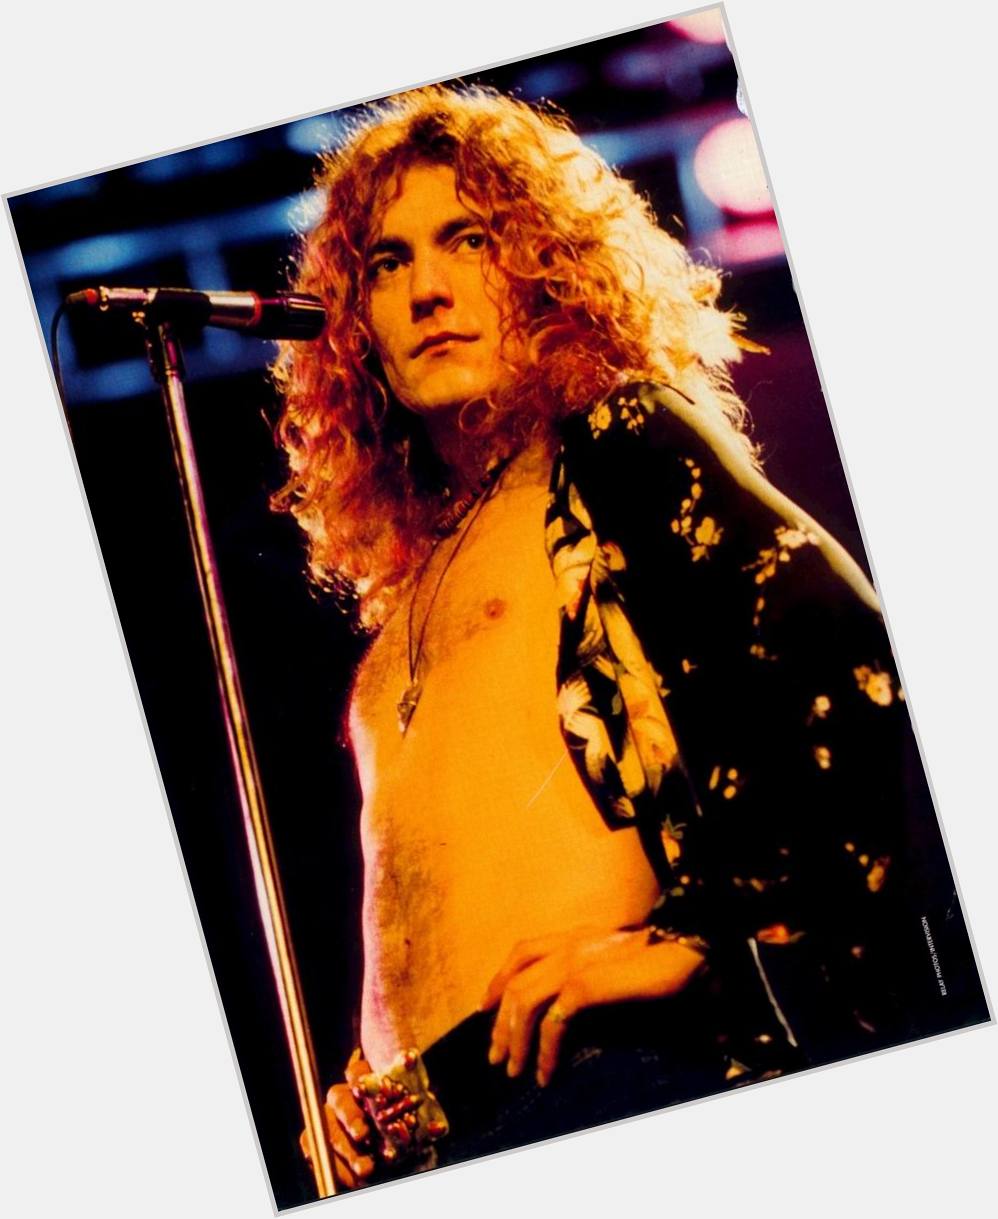 Robert Plant is 69 years old today. He was born on 20 August 1948 Happy birthday Robert!  